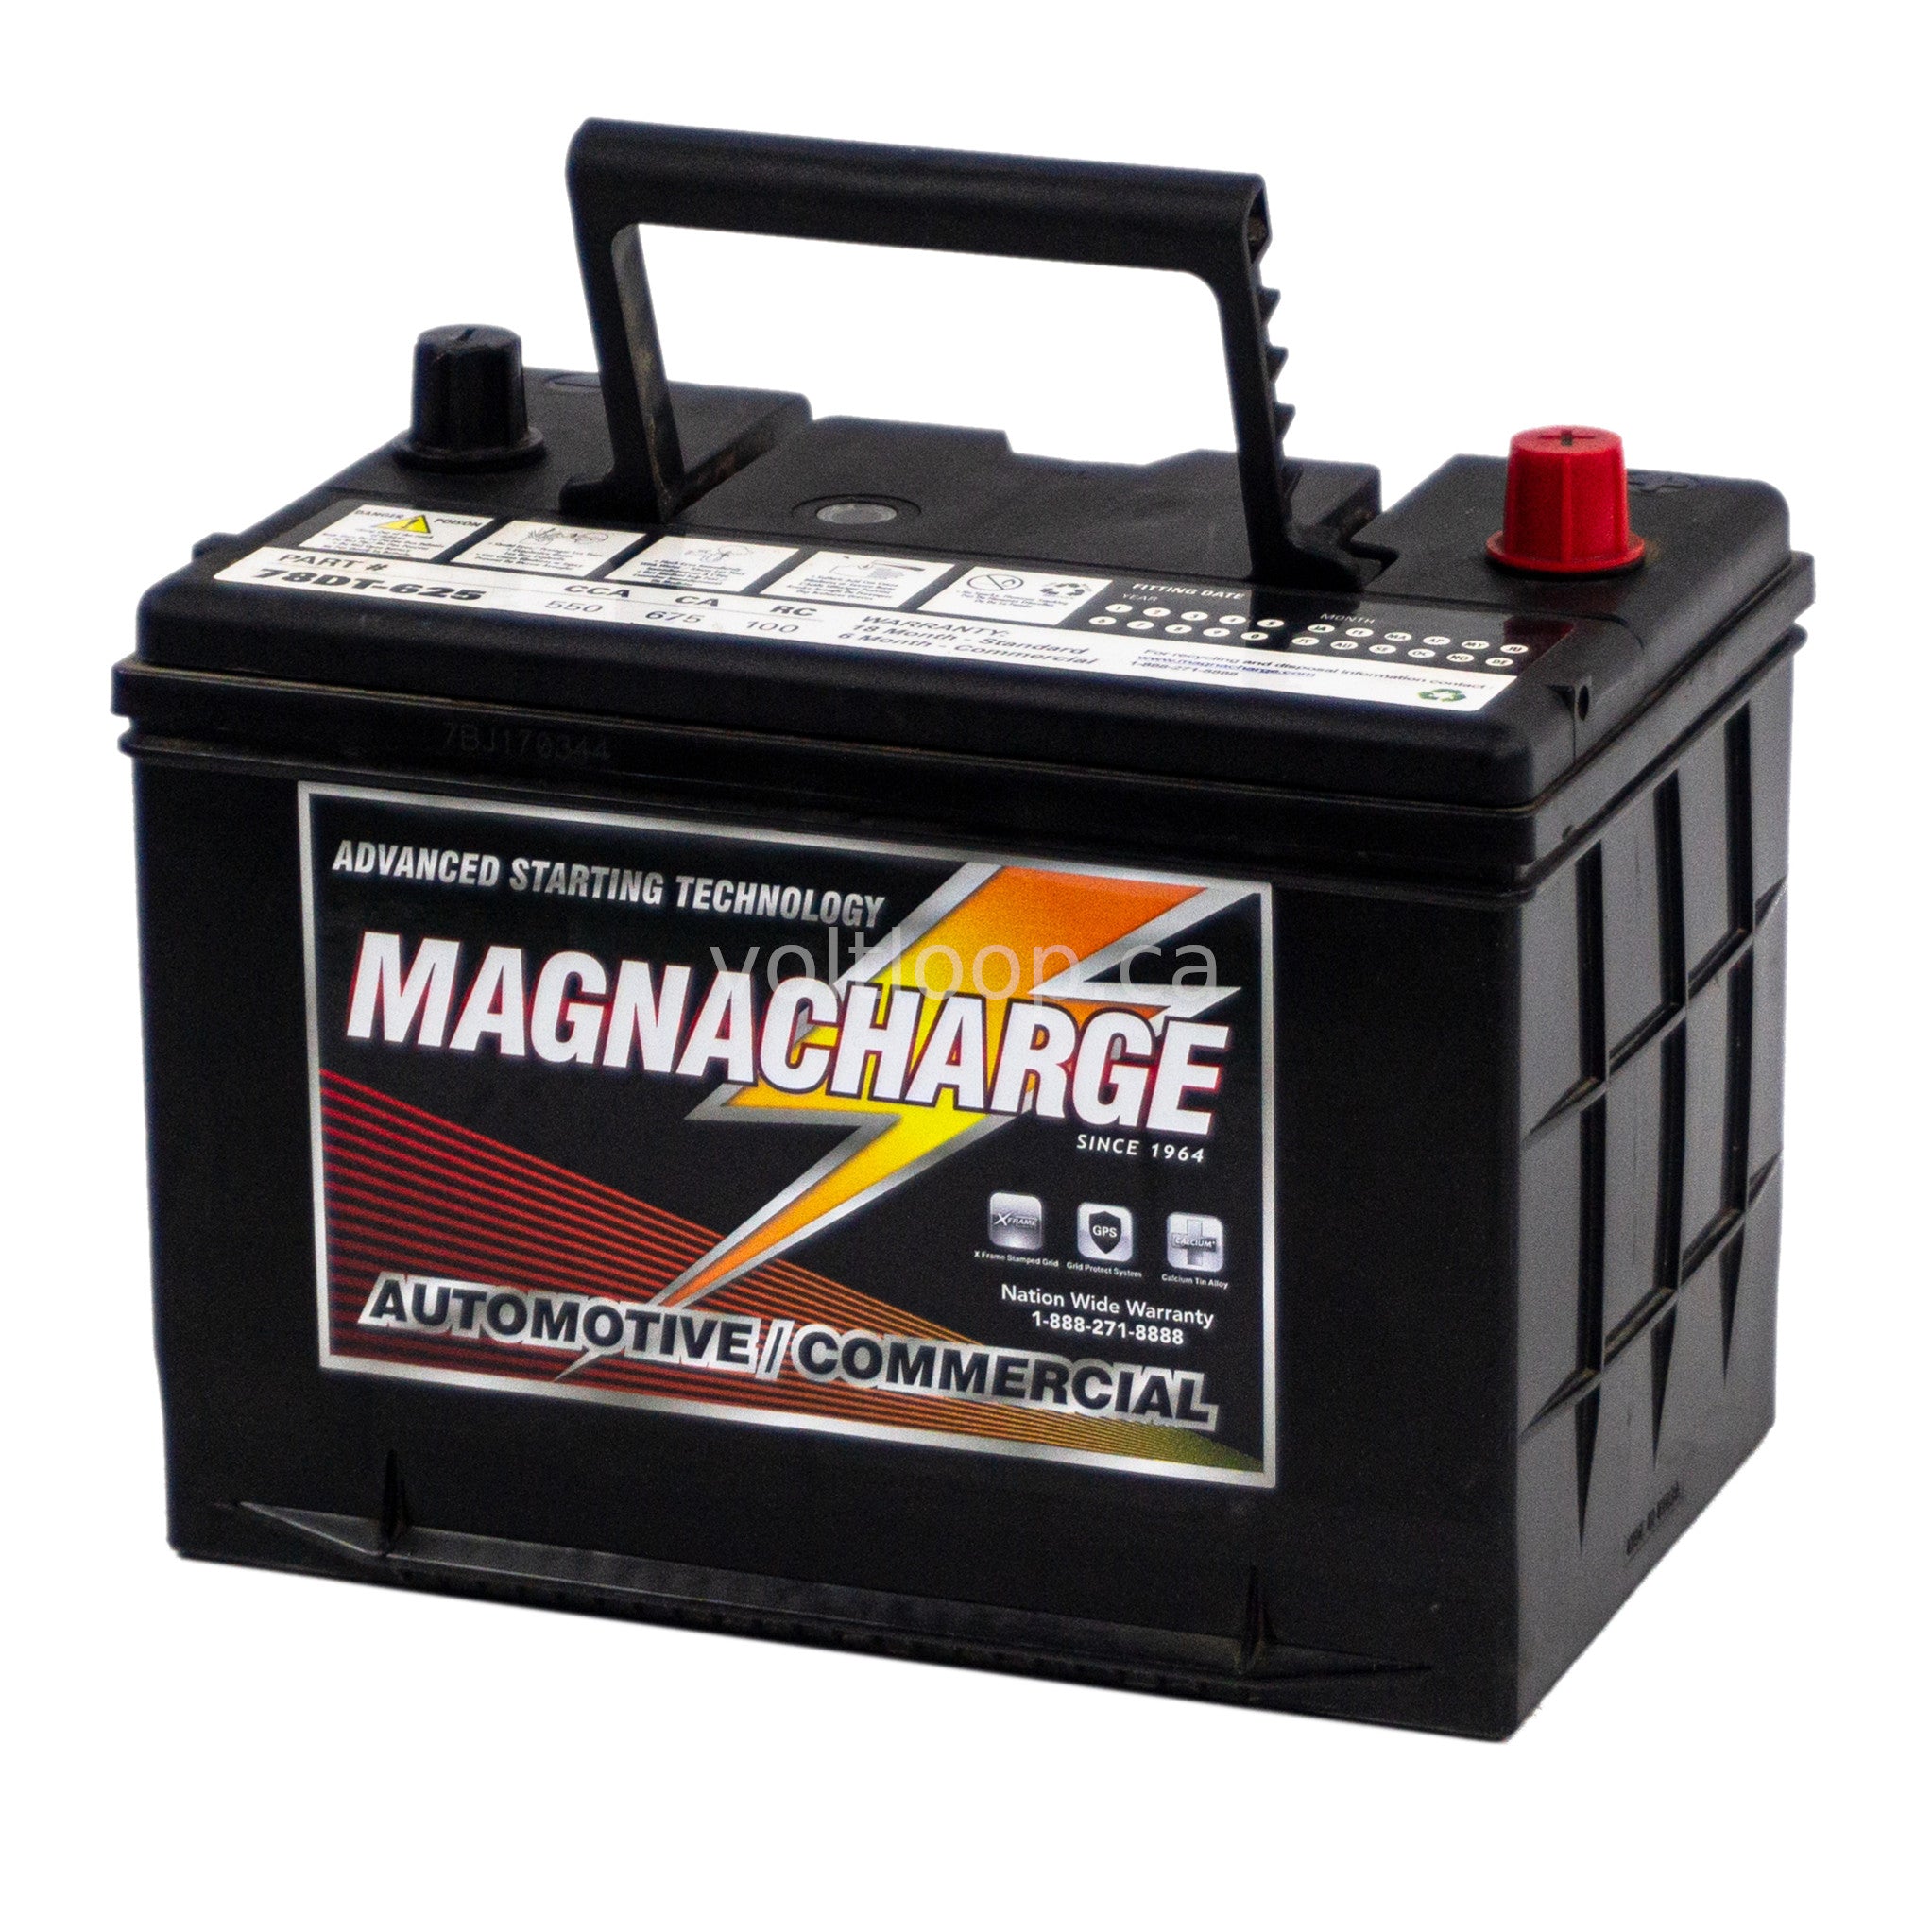 Magnacharge 78DT-625 Group 34/78 Car Battery